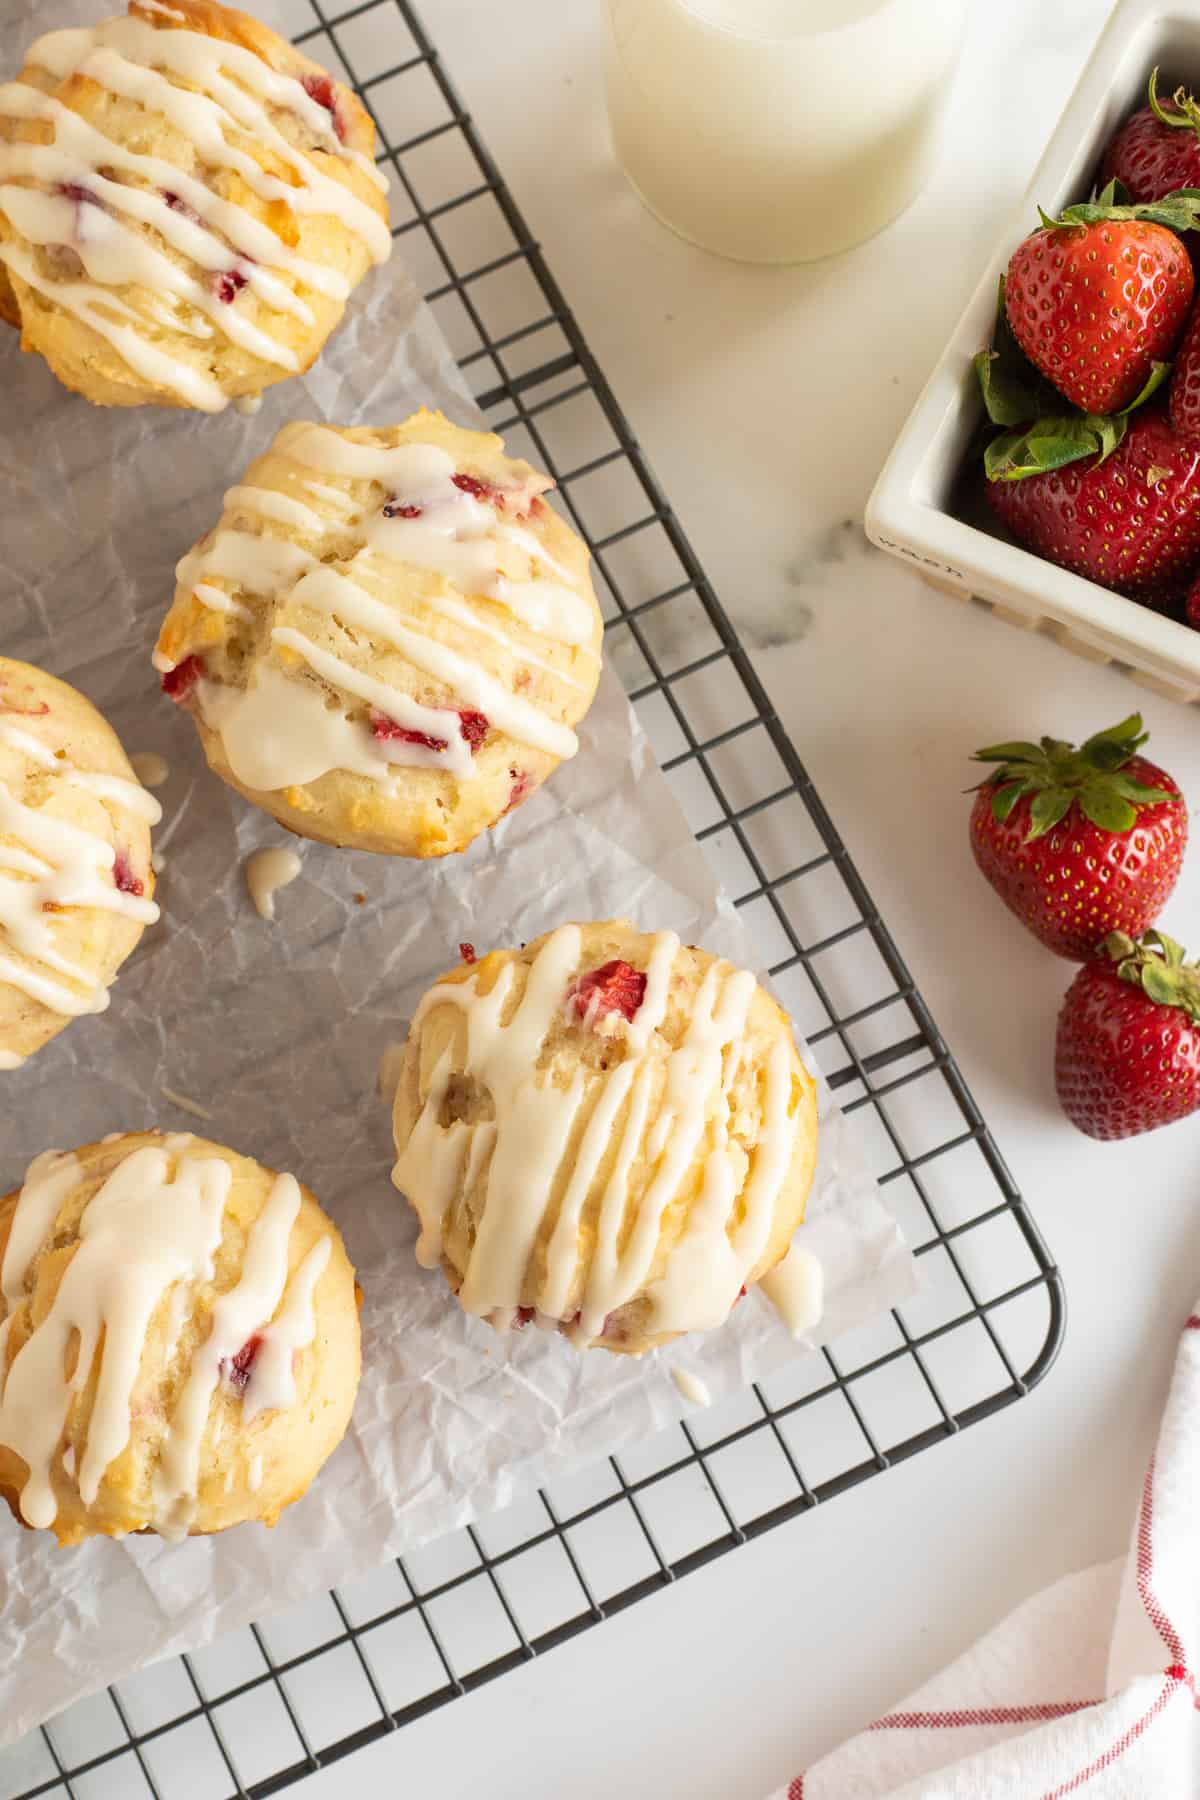 A top down shot of glazed strawberry muffins on a wire rack next to a container of fresh strawberries.